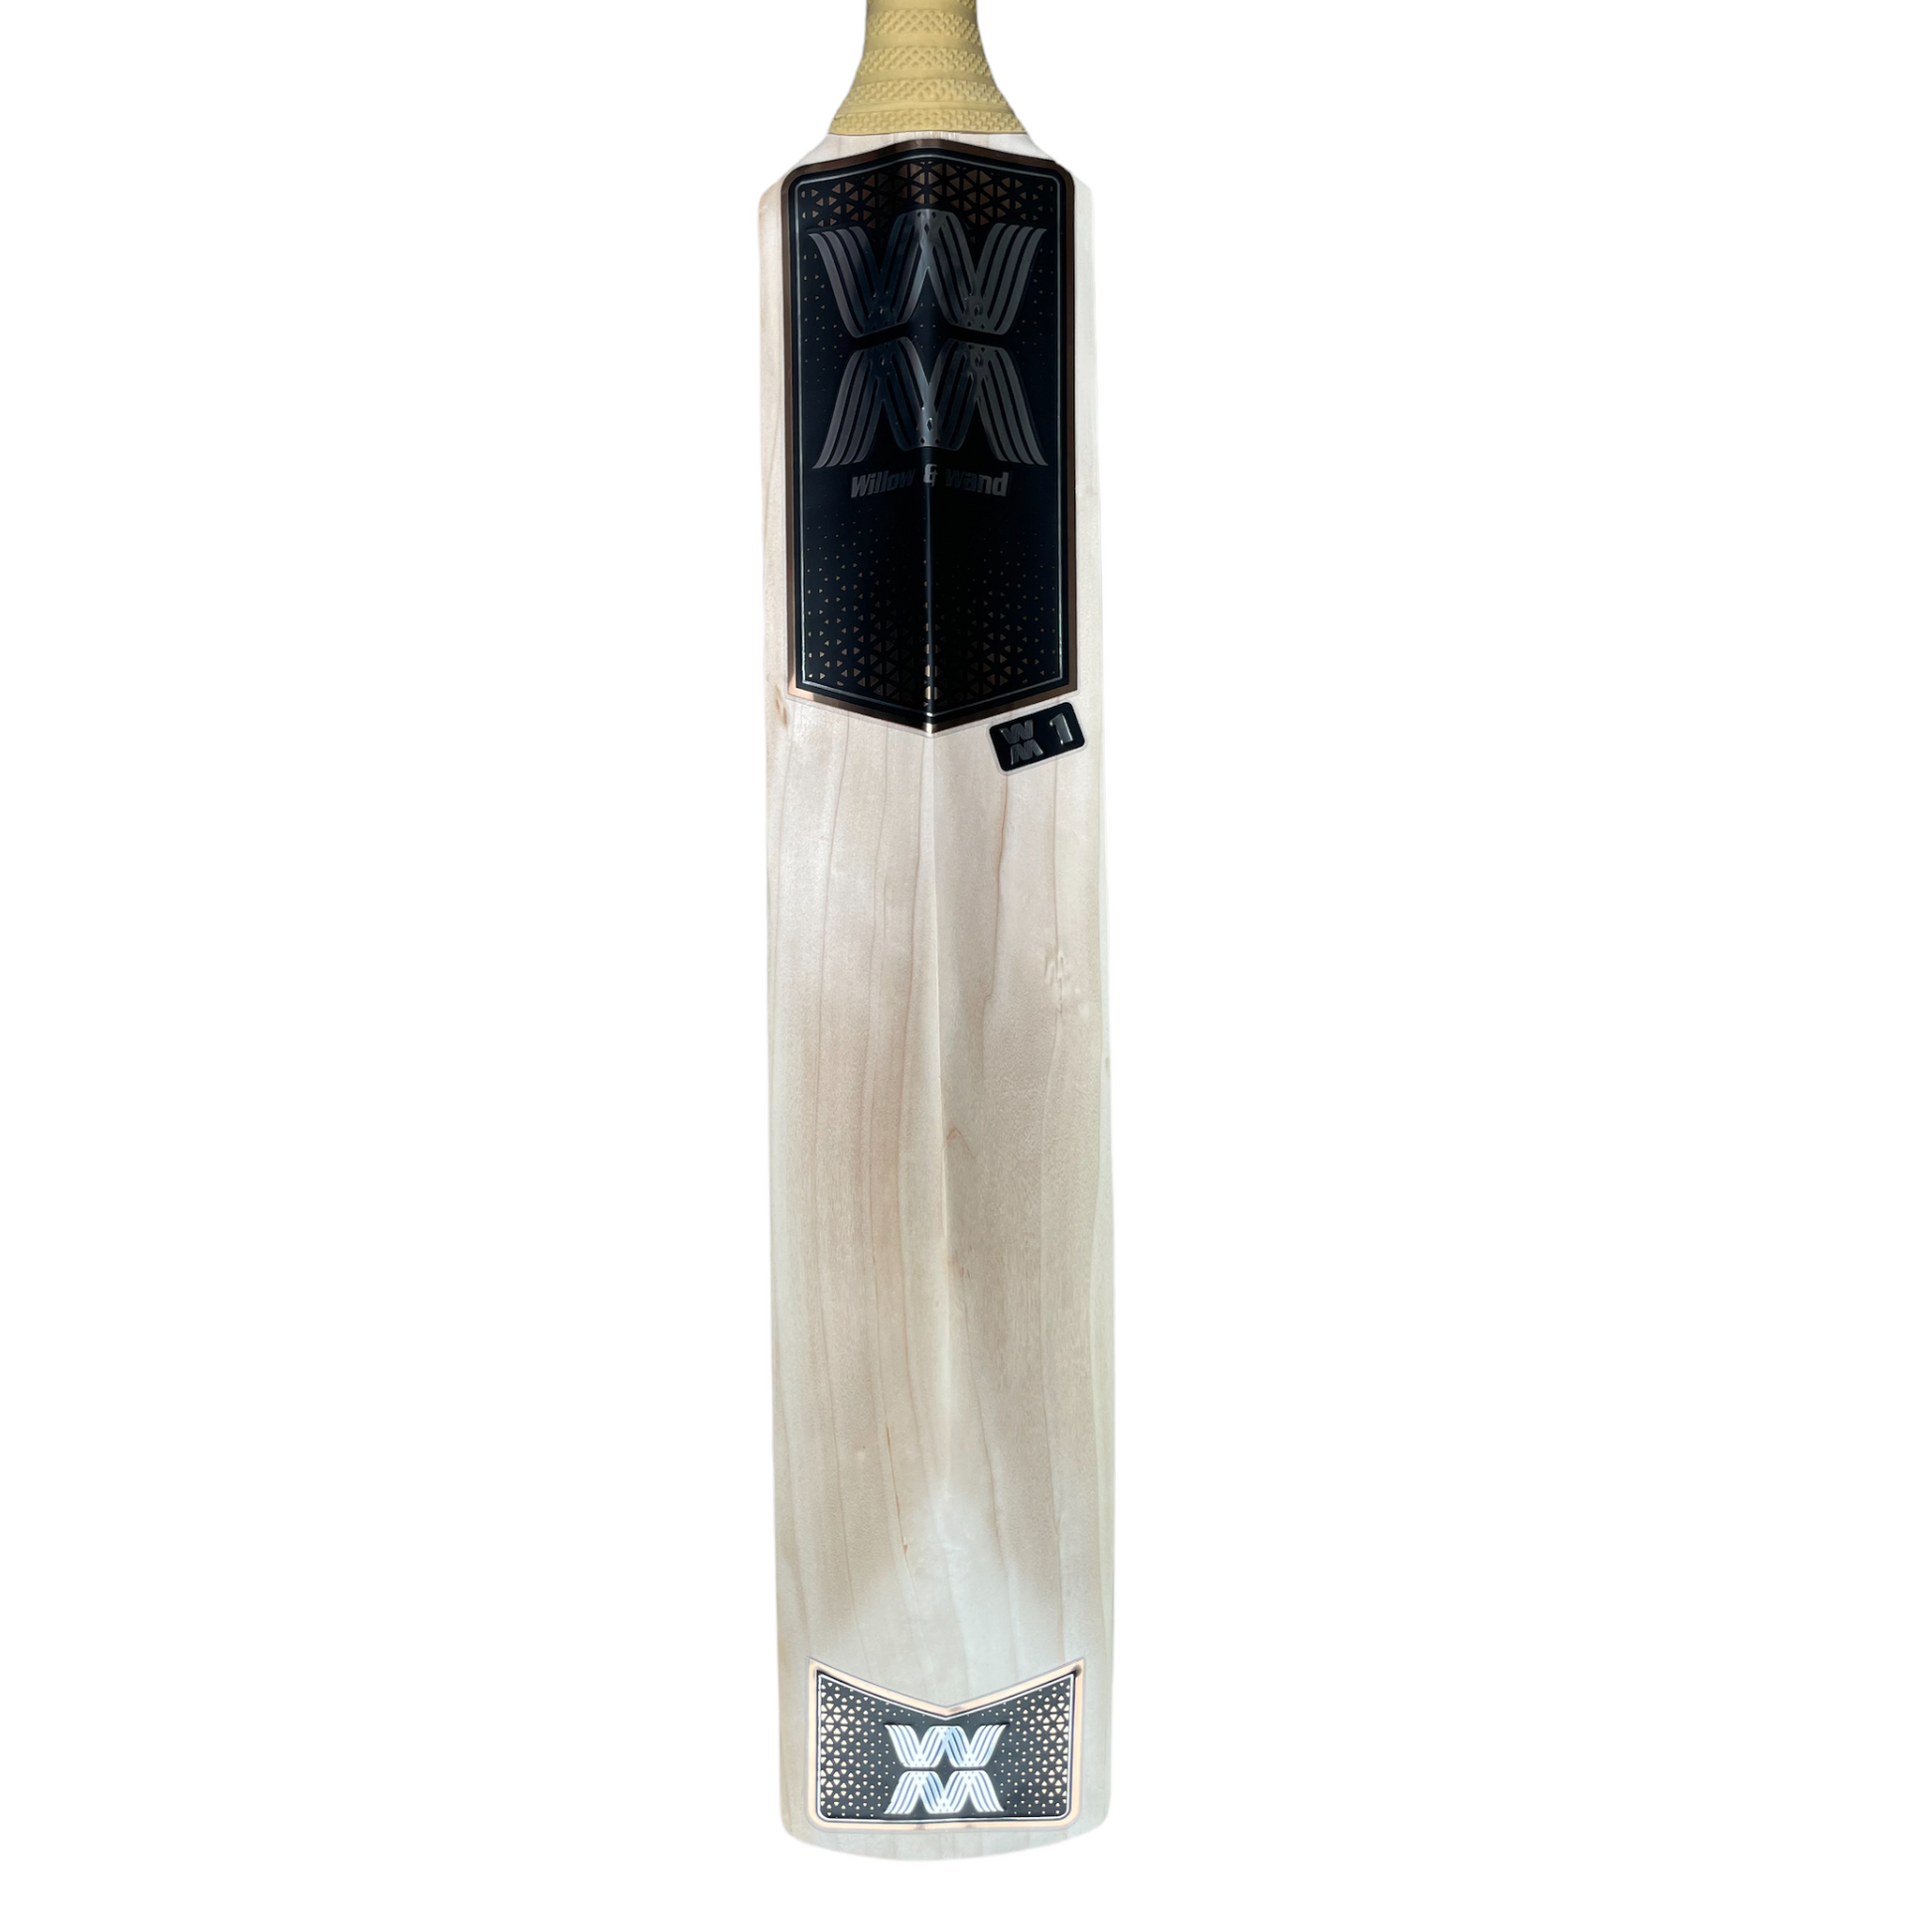 Willow & Wand Grade 1 Cricket bat. Handmade handcrafted english willow. Independent bat makers. Cricket bat showroom and shop in east sussex Brighton and hove.